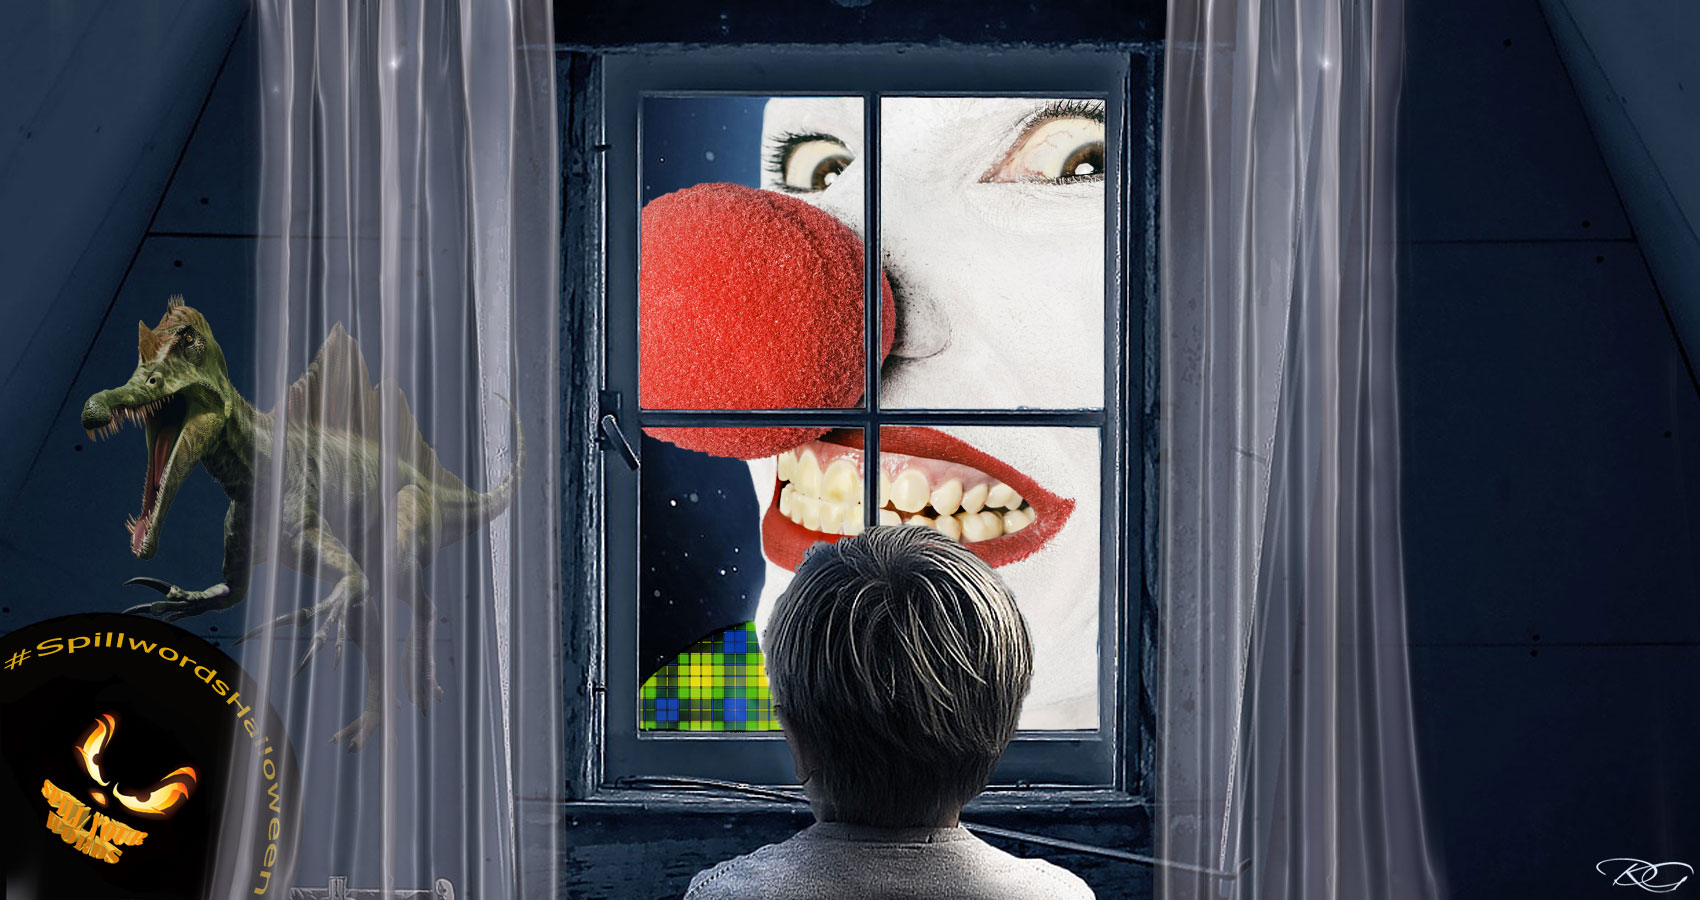 The Clown At The Window by Angel Daemon at Spillwords.com